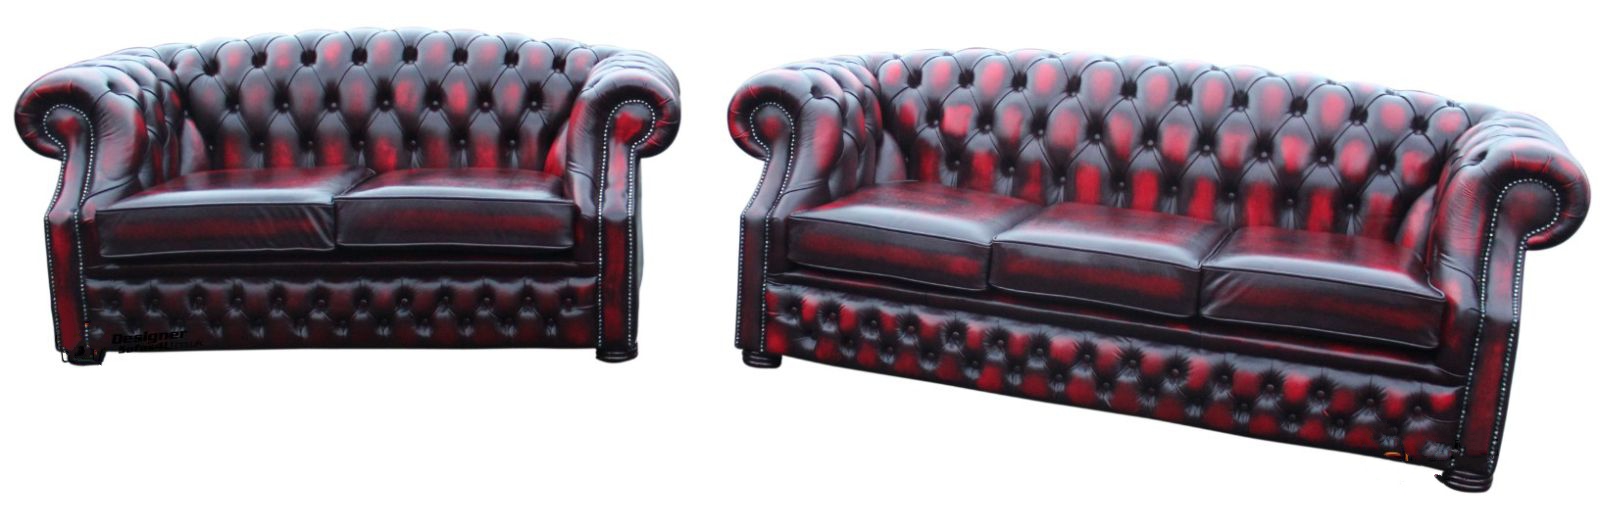 Product photograph of Chesterfield 3 2 Seater Antique Oxblood Red Leather Sofa Suite In Buckingham Style from Chesterfield Sofas.